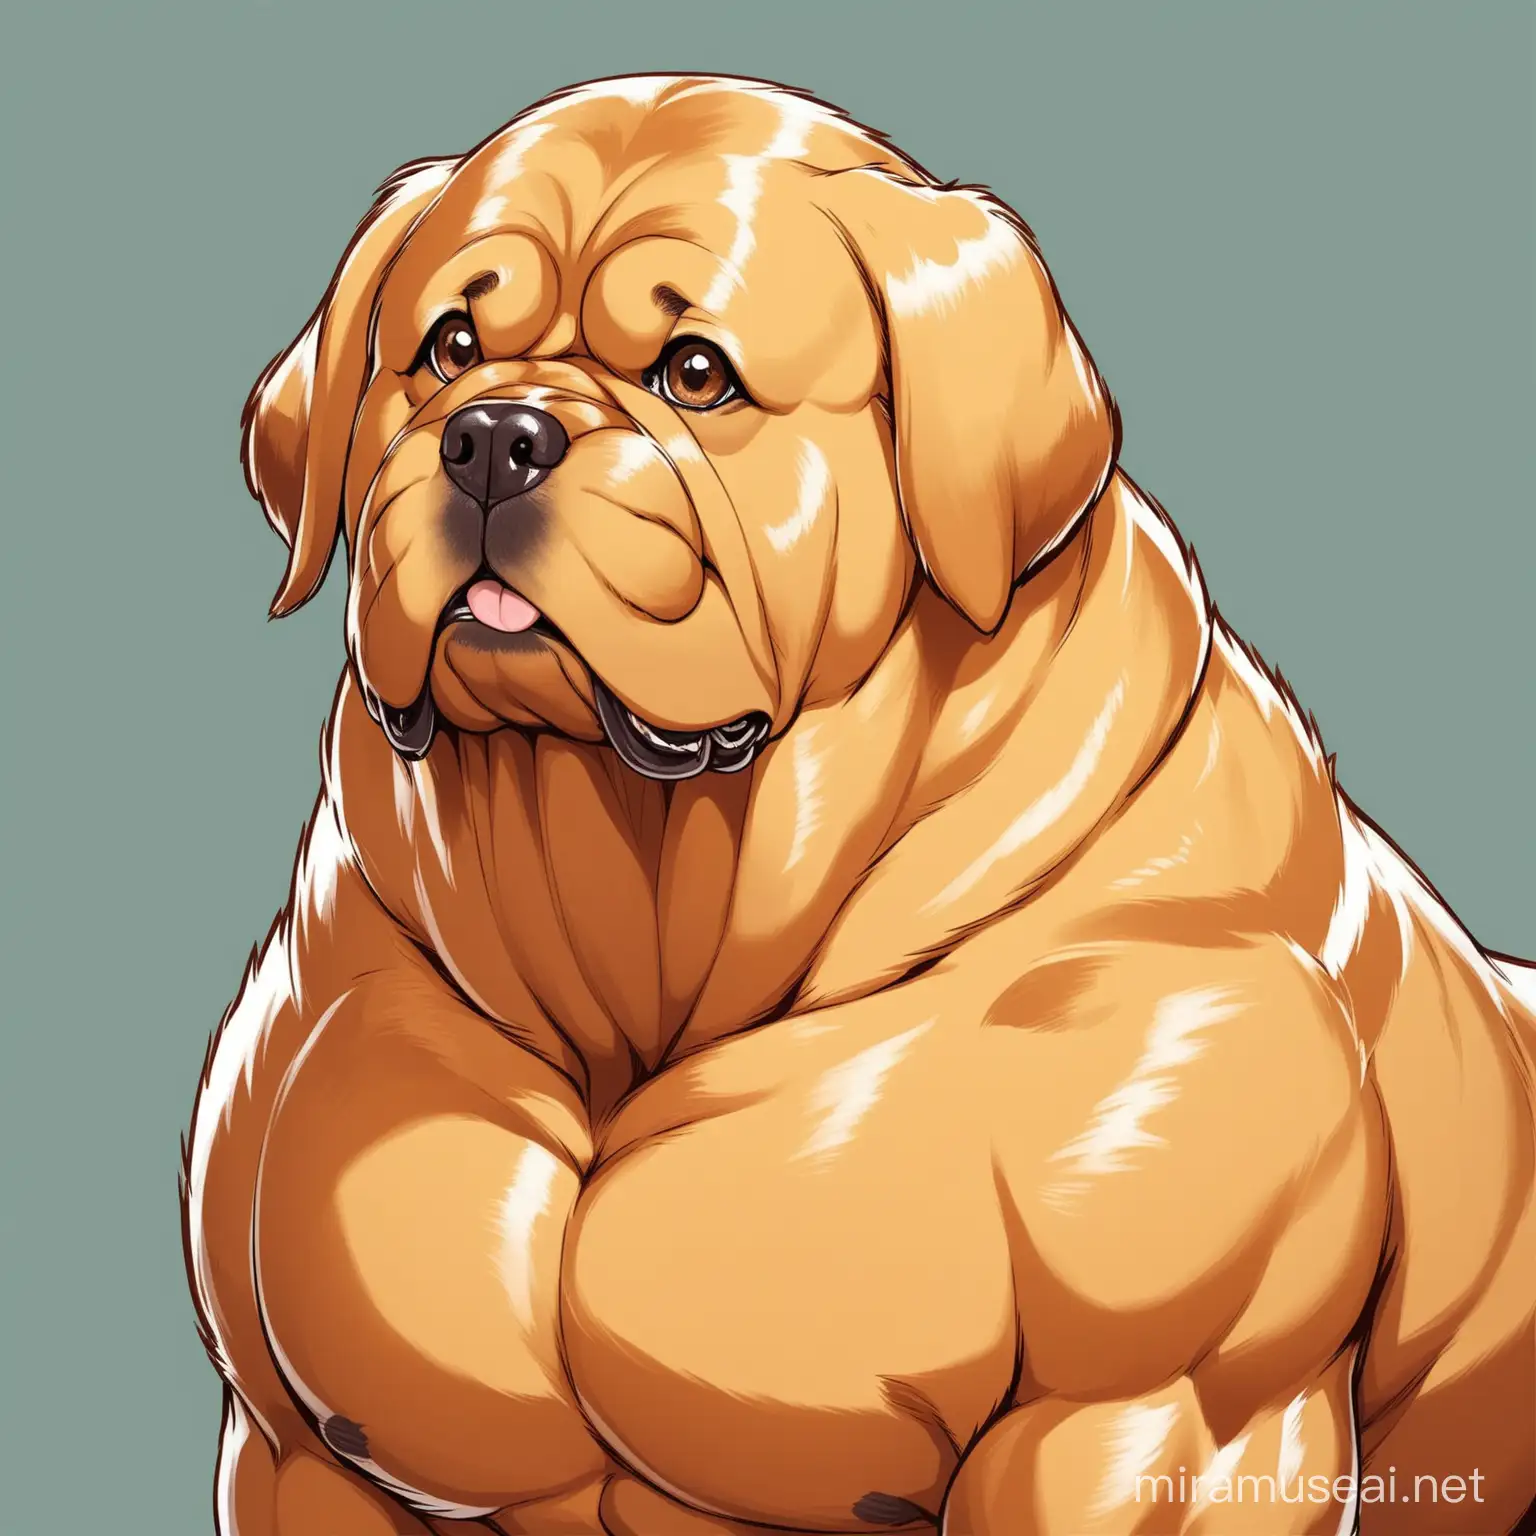 Playful Buff Dog with a Comical Expression